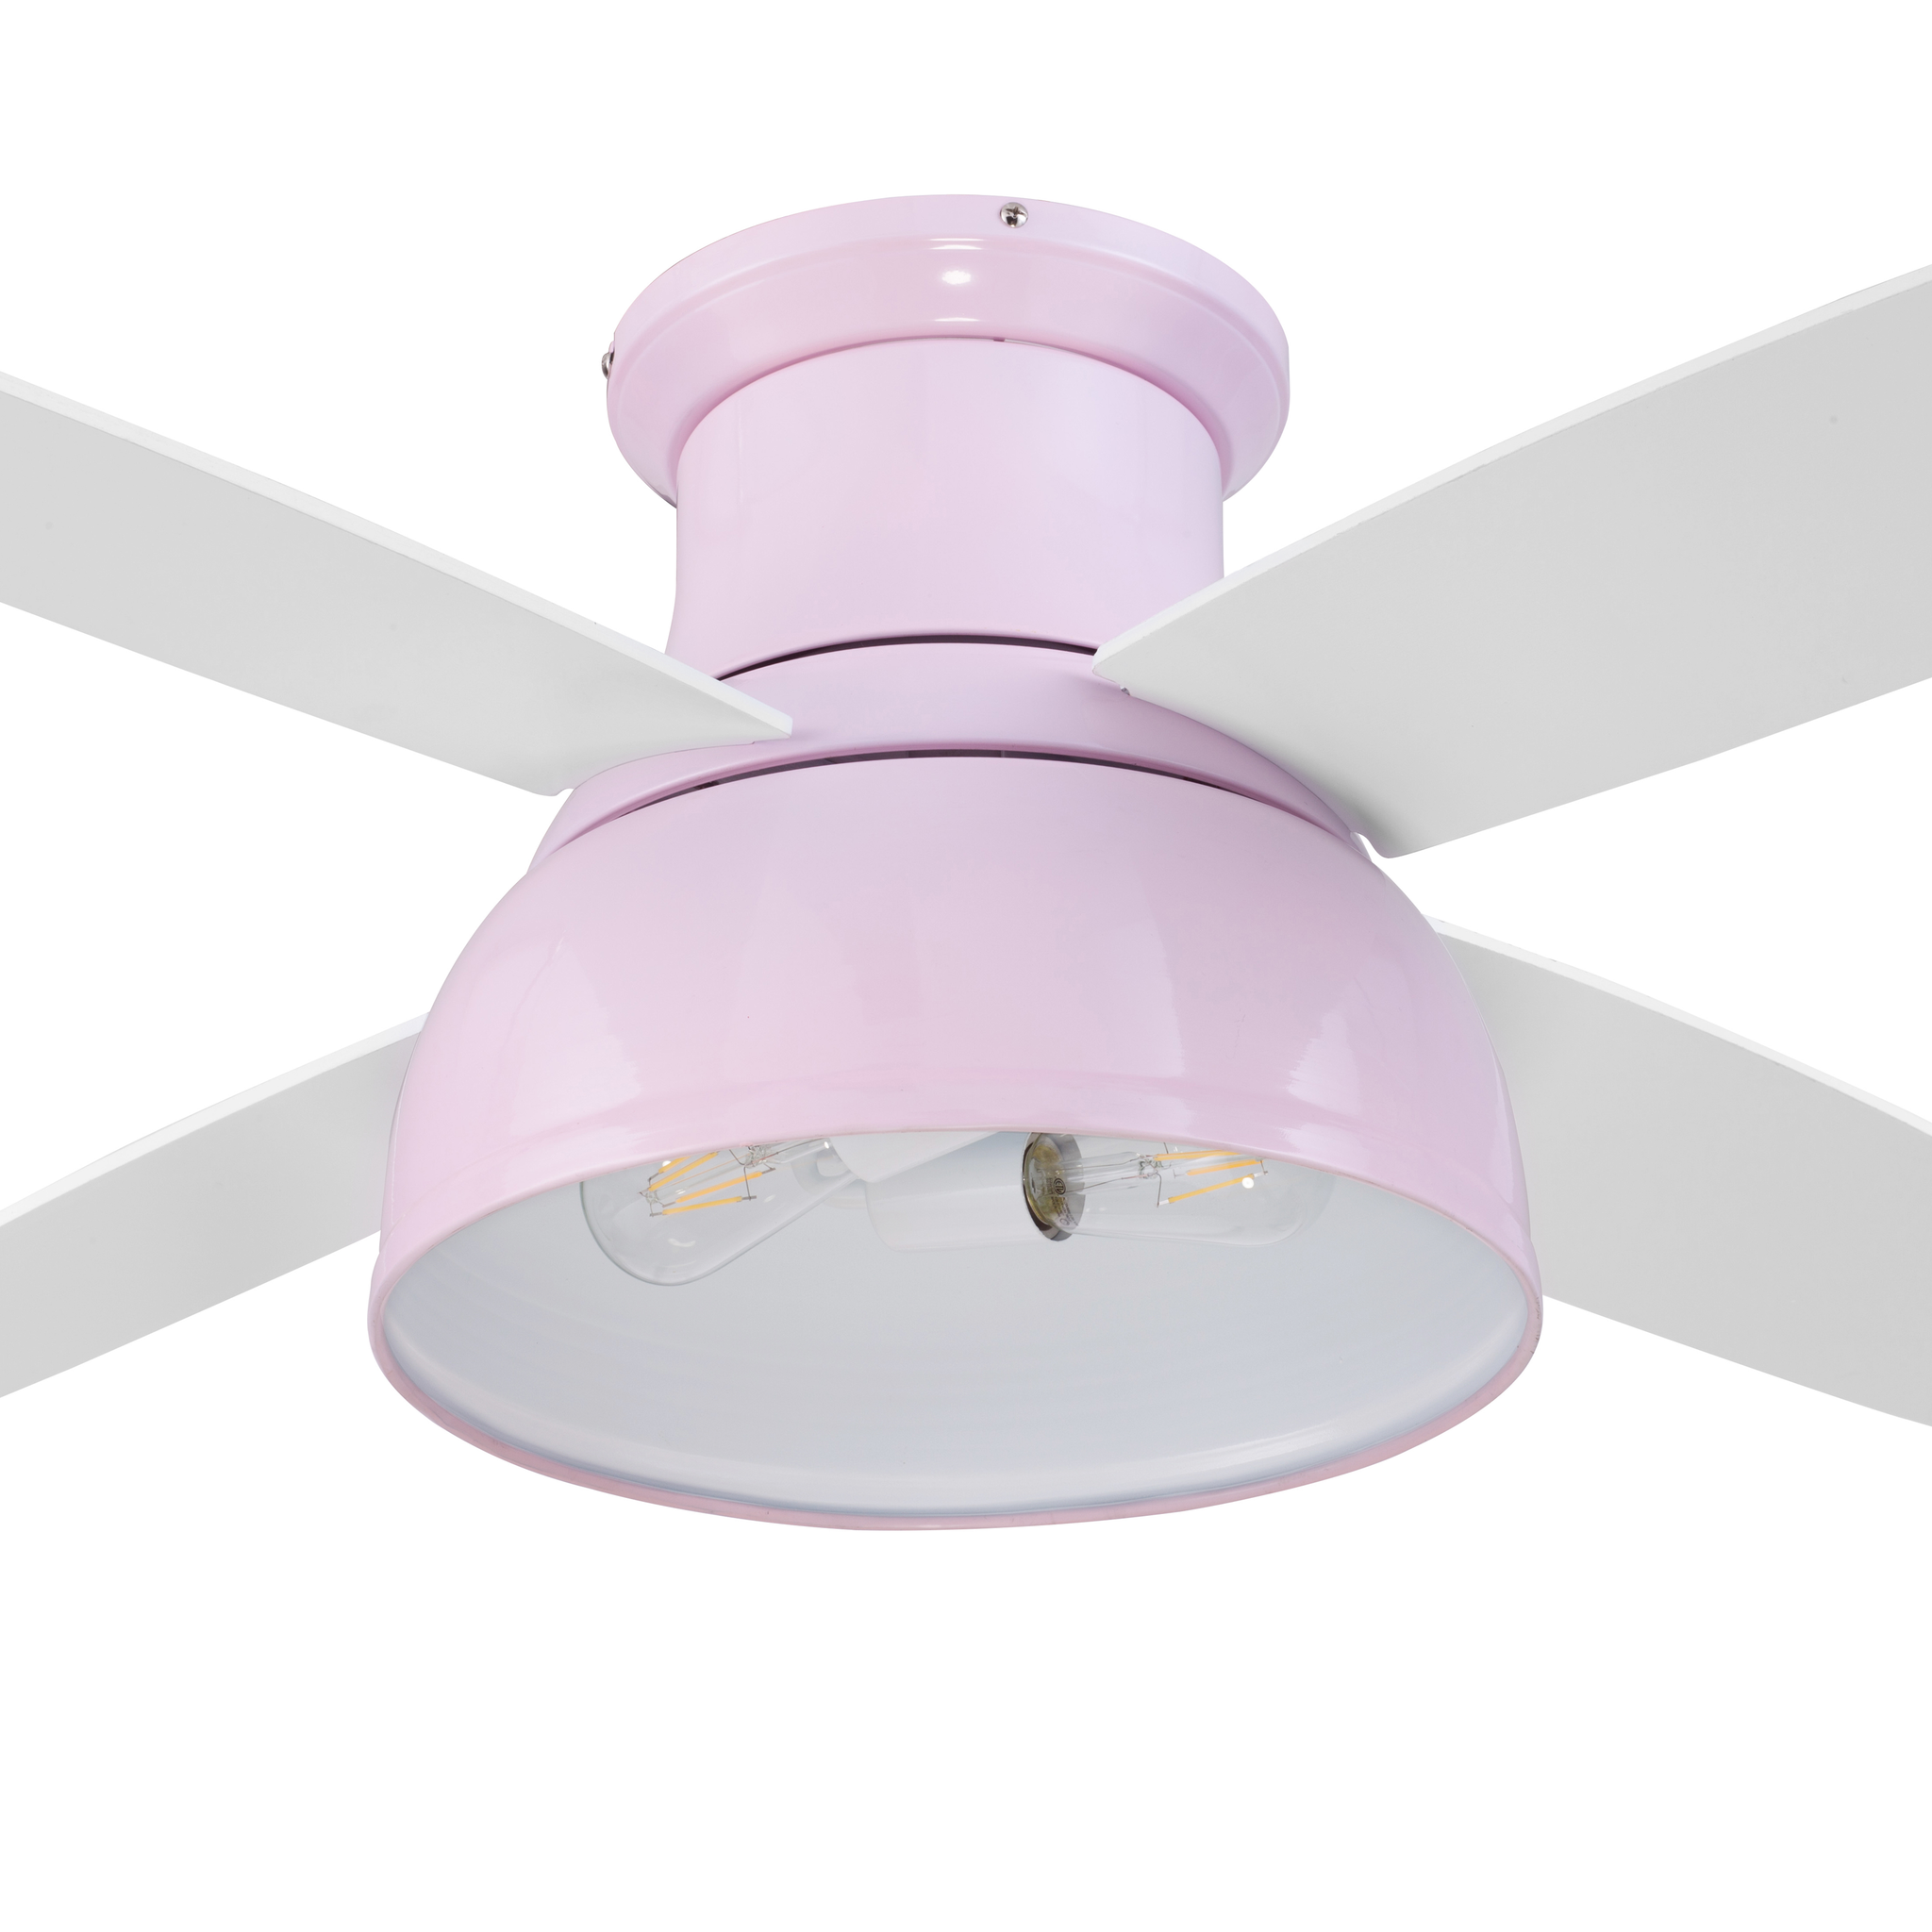 52 Inch Edora, Peony Pink, Remote Control, Ceiling Fan by Prominence Home